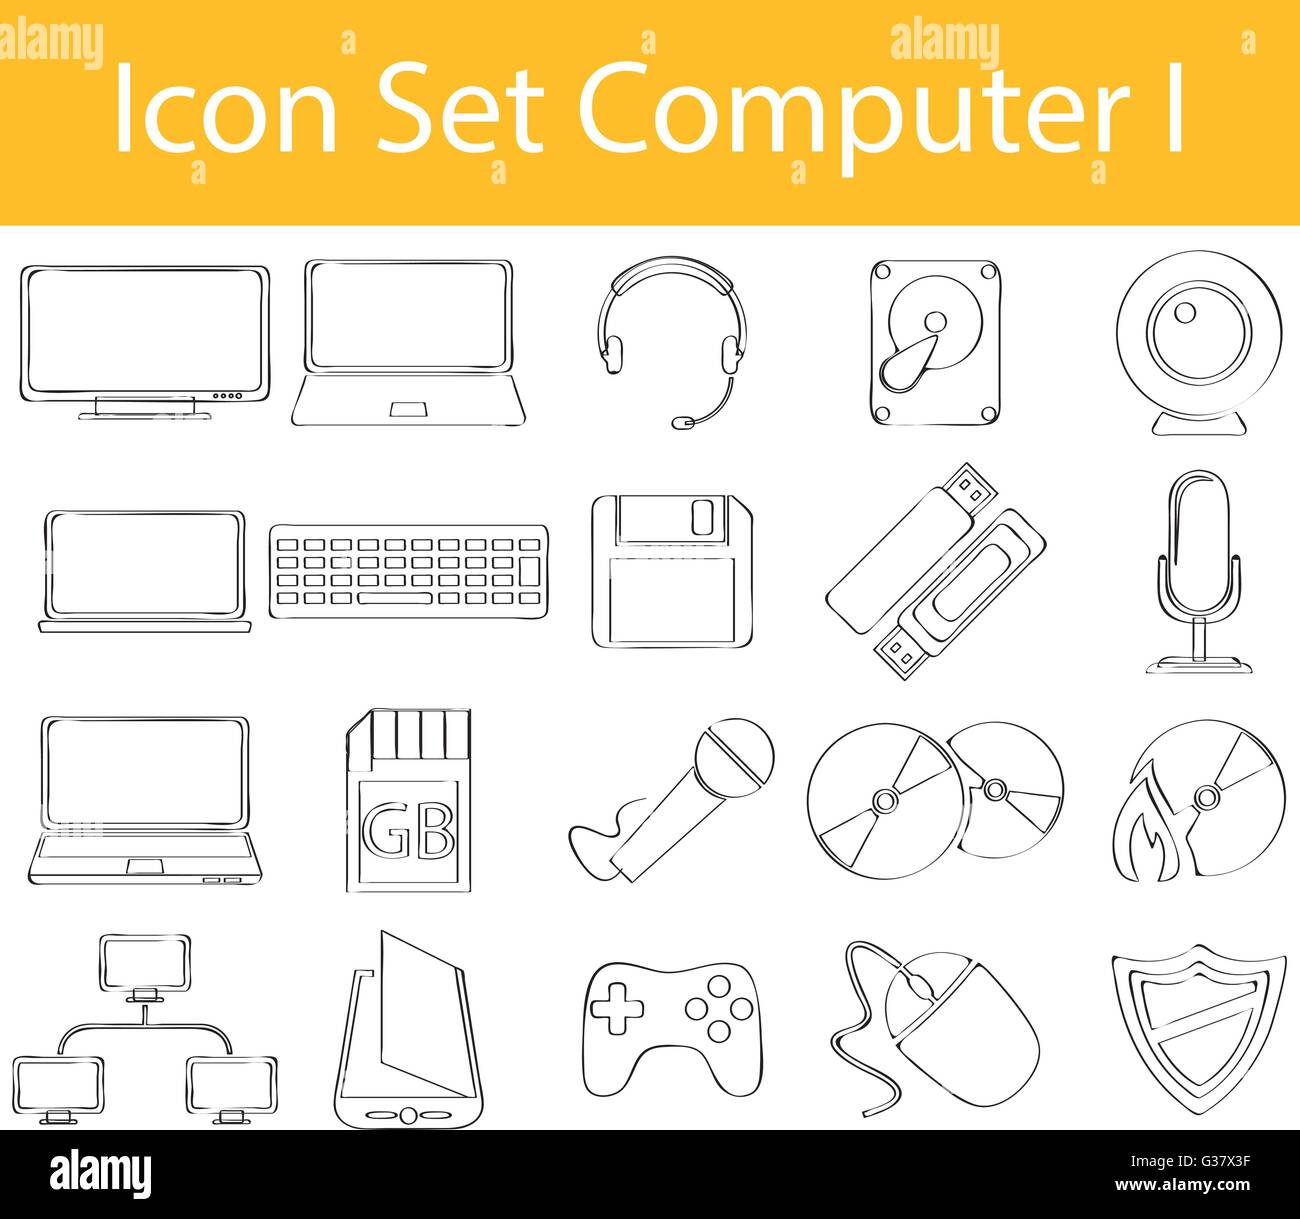 Drawn Doodle Lined Icon Set Computer I with 20 icons for the creative use in graphic design Stock Vector